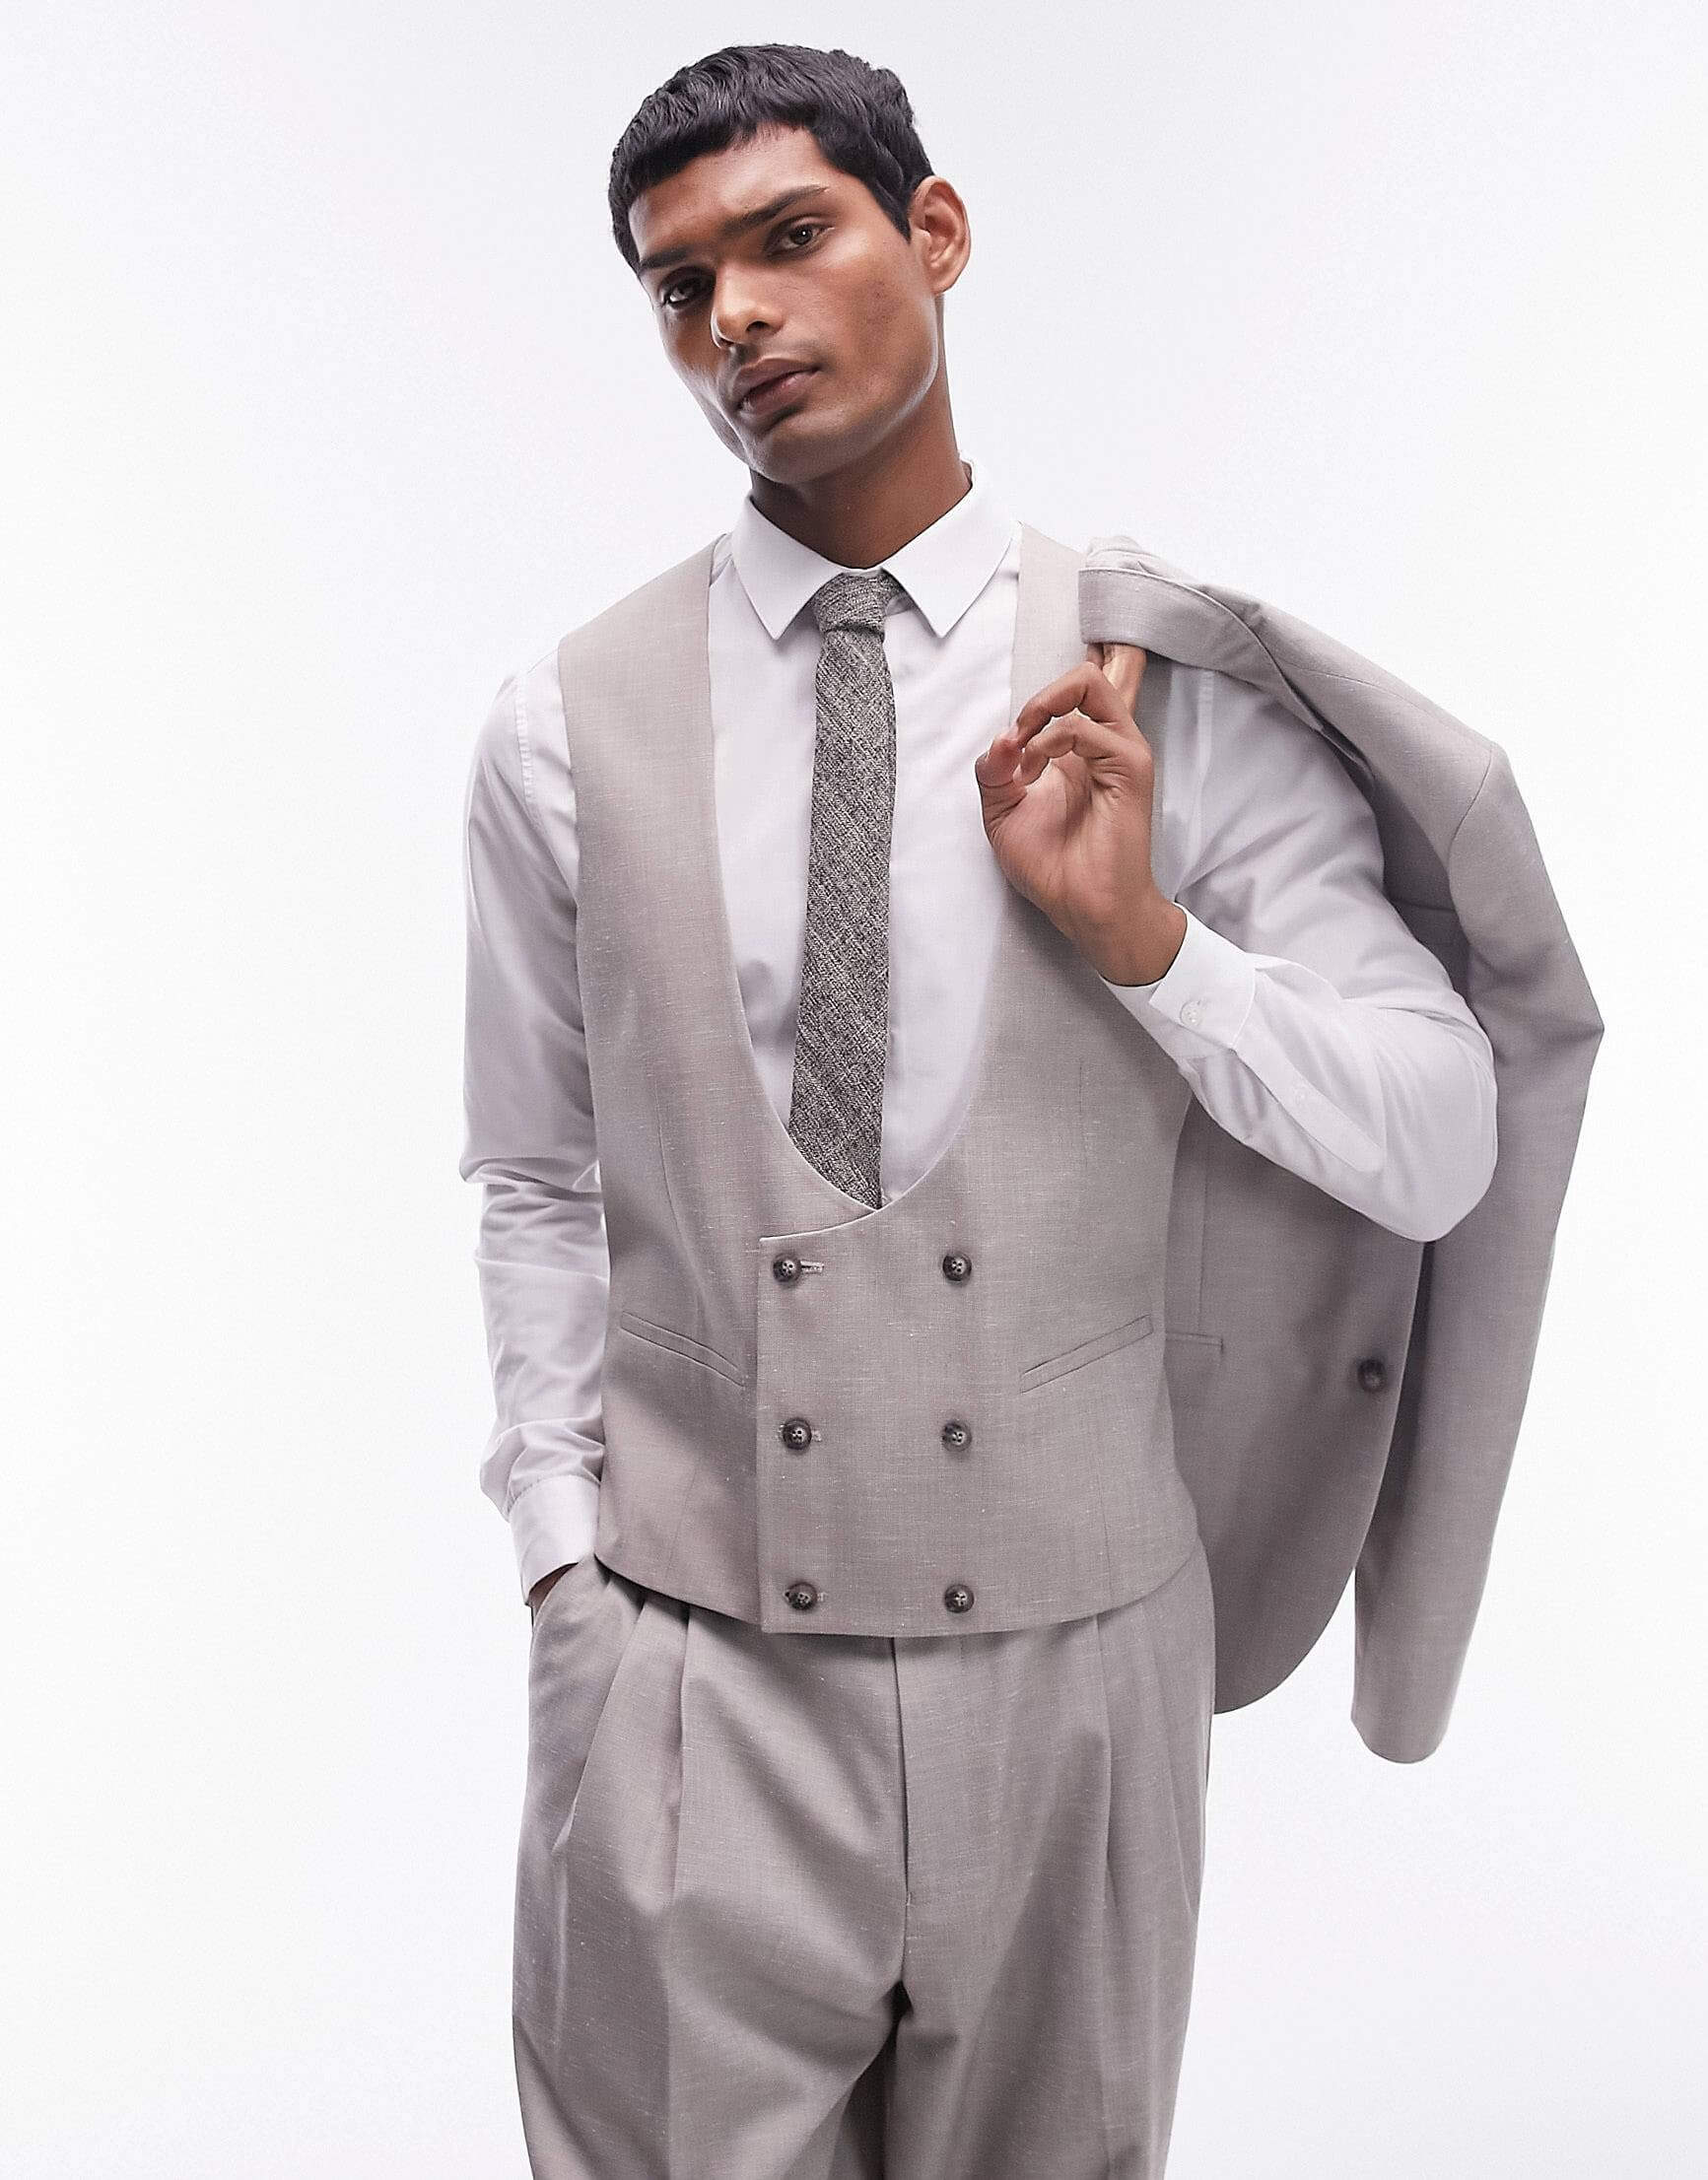 цена Жилет Topman With A Fitted Cut Made Of Linen-Blend Material, серо-бежевый